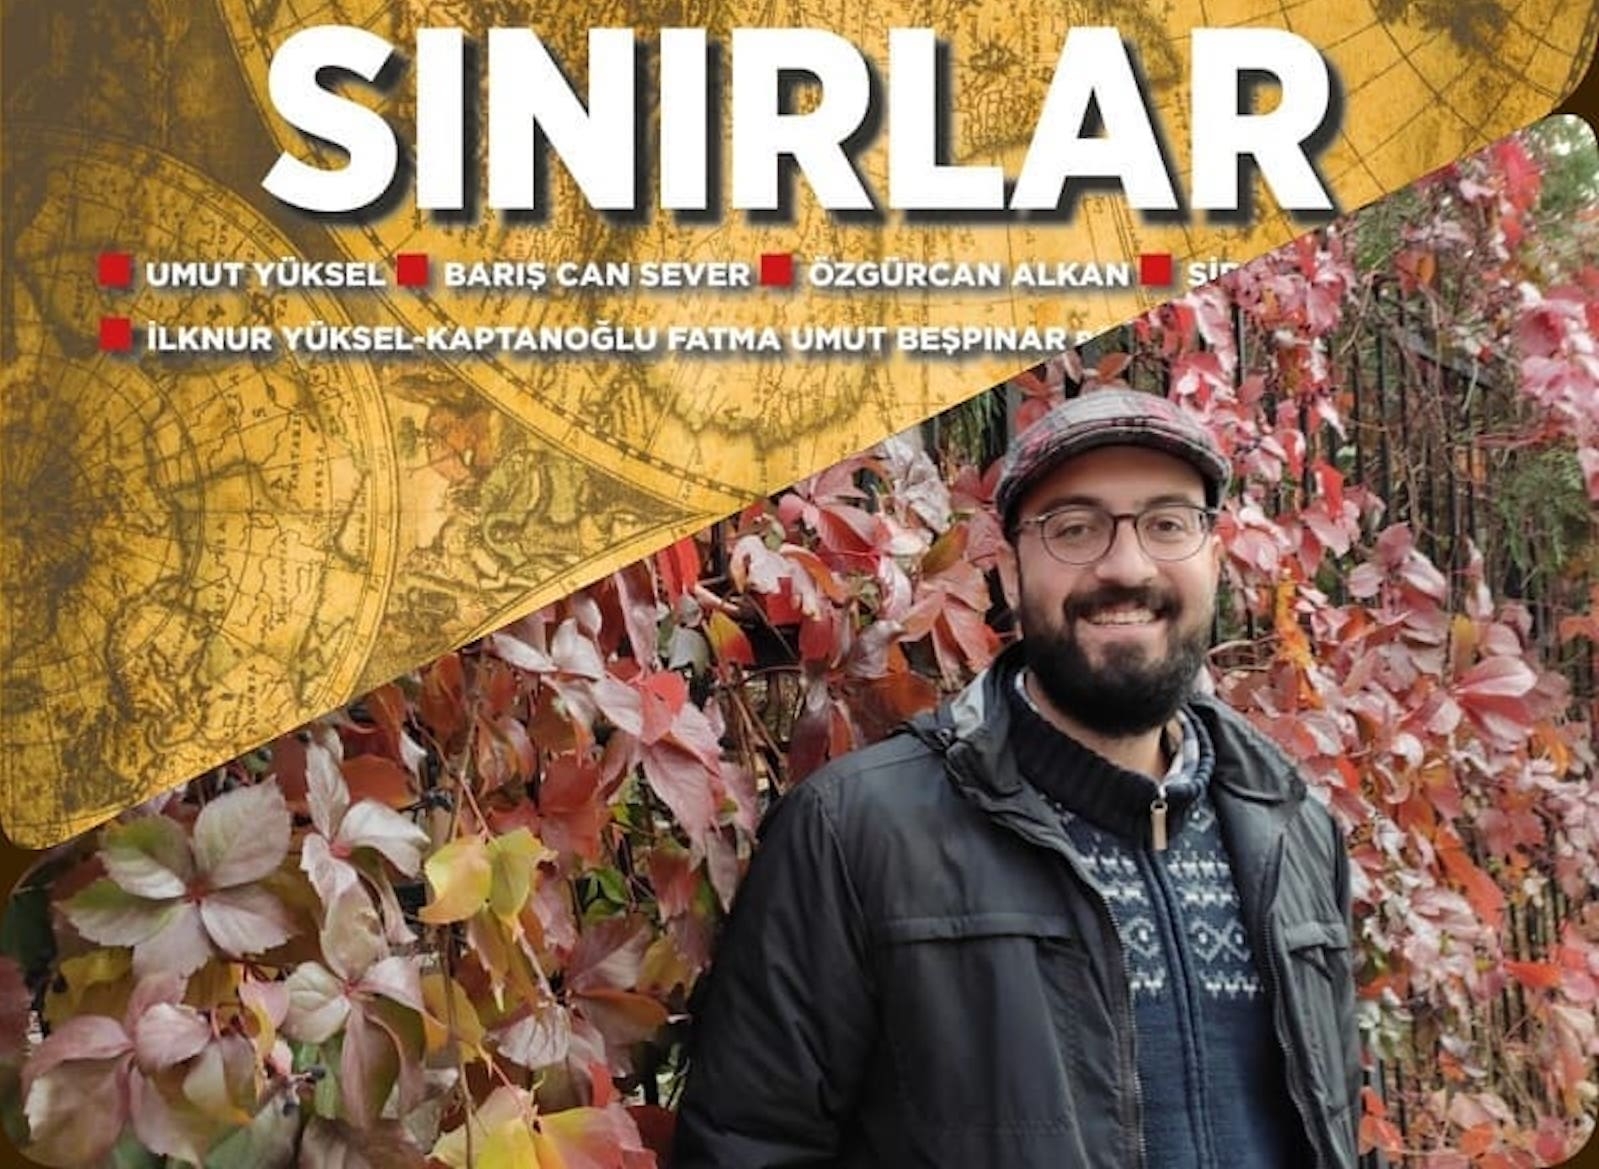 Barış Can Sever's article on the Climate Change was published